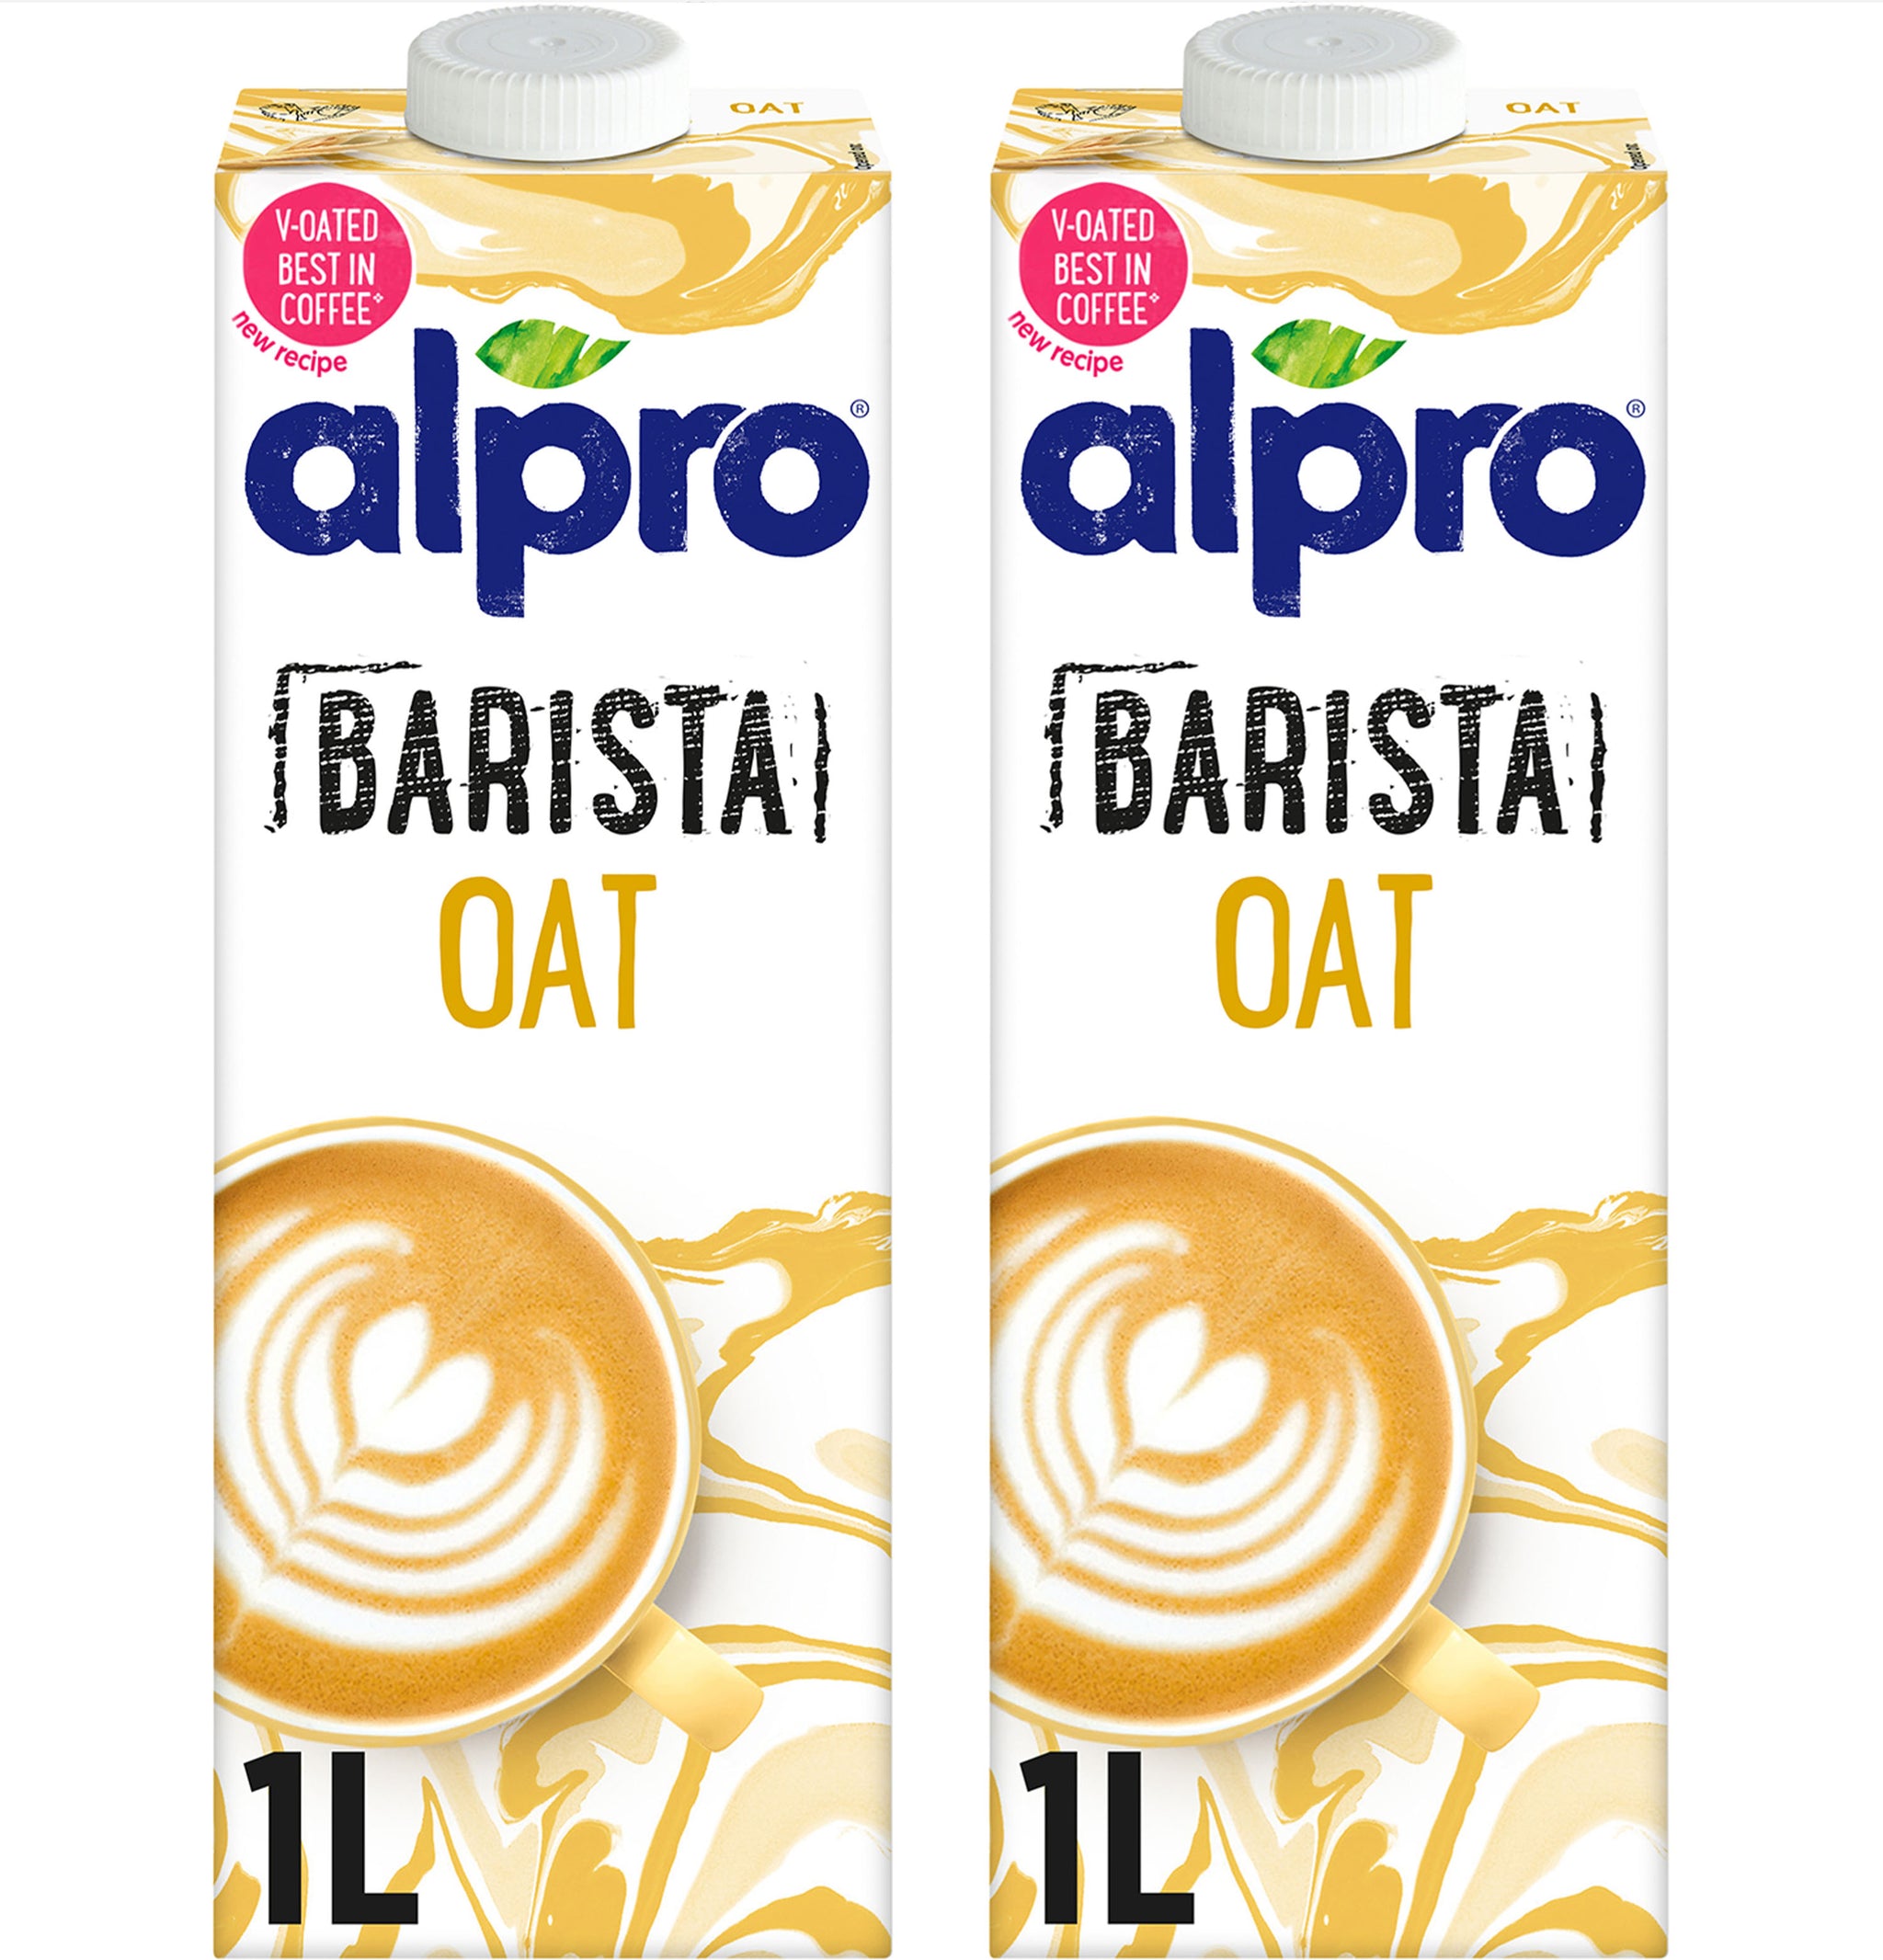 Alpro Barista Oat Long Life Drink (1L), Delivery Near You